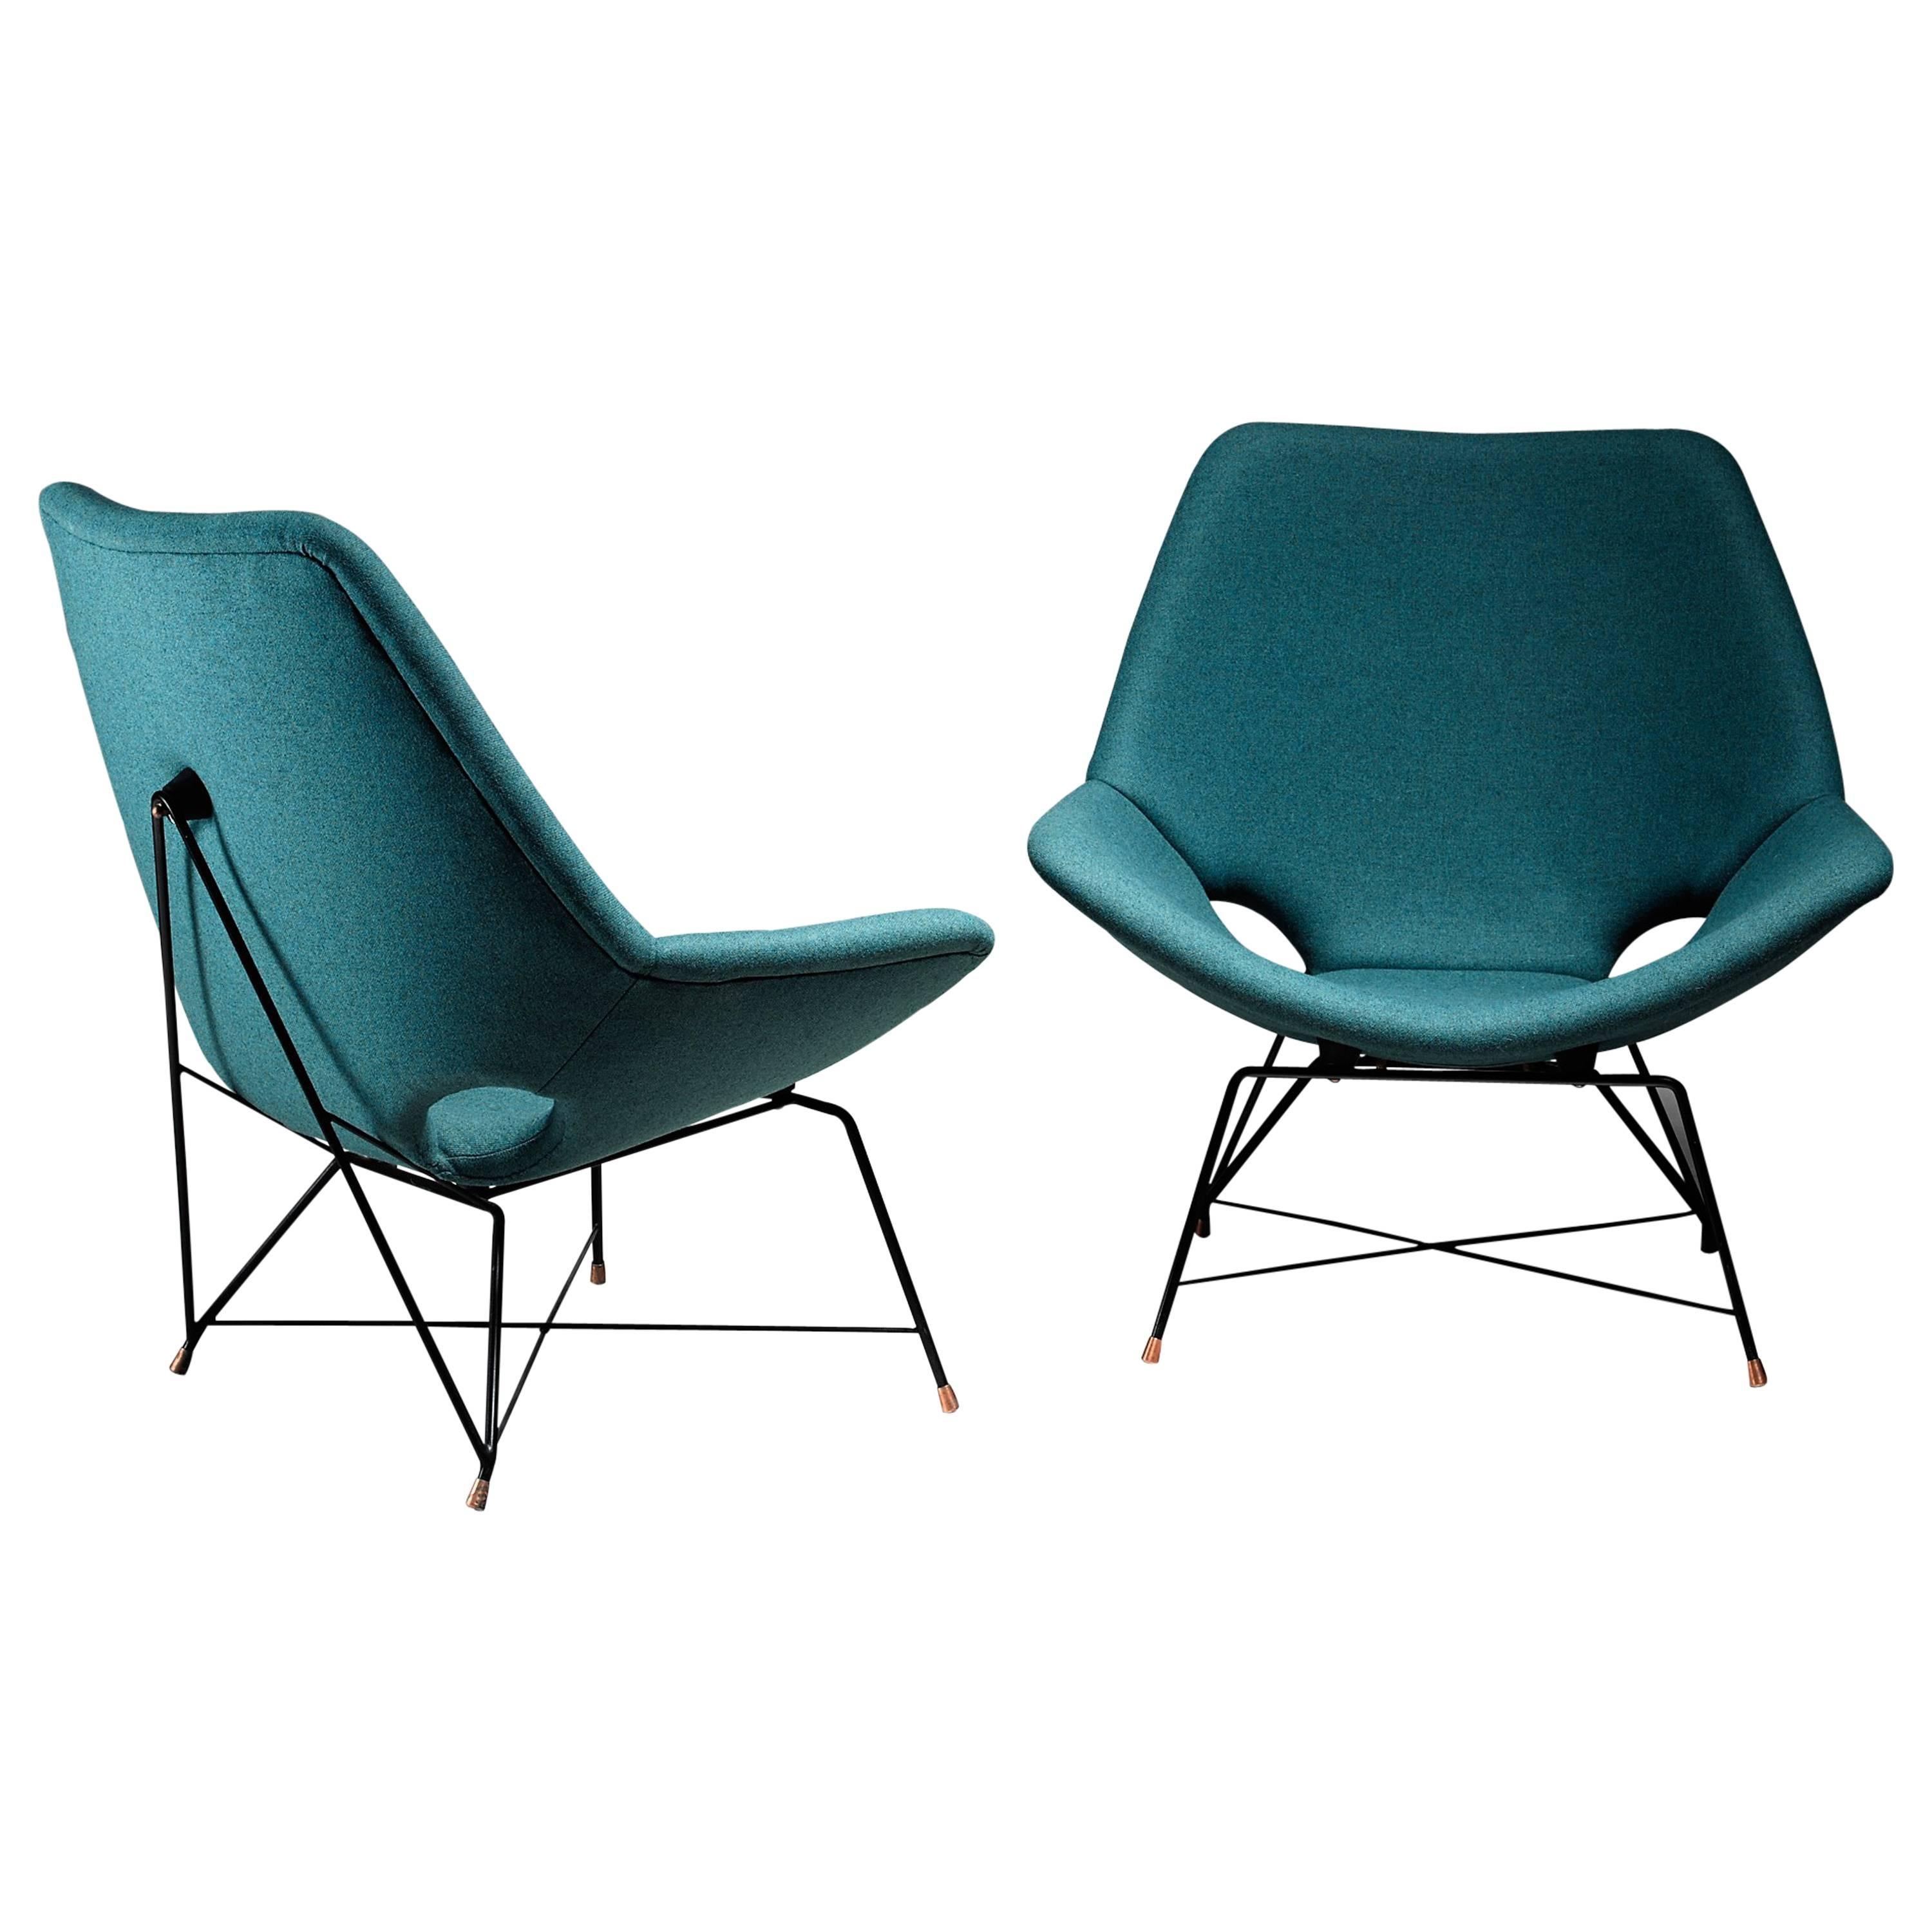 Pair of Lounge Chairs by Augusto Bozzi for Saporiti, Italy, 1960s For Sale